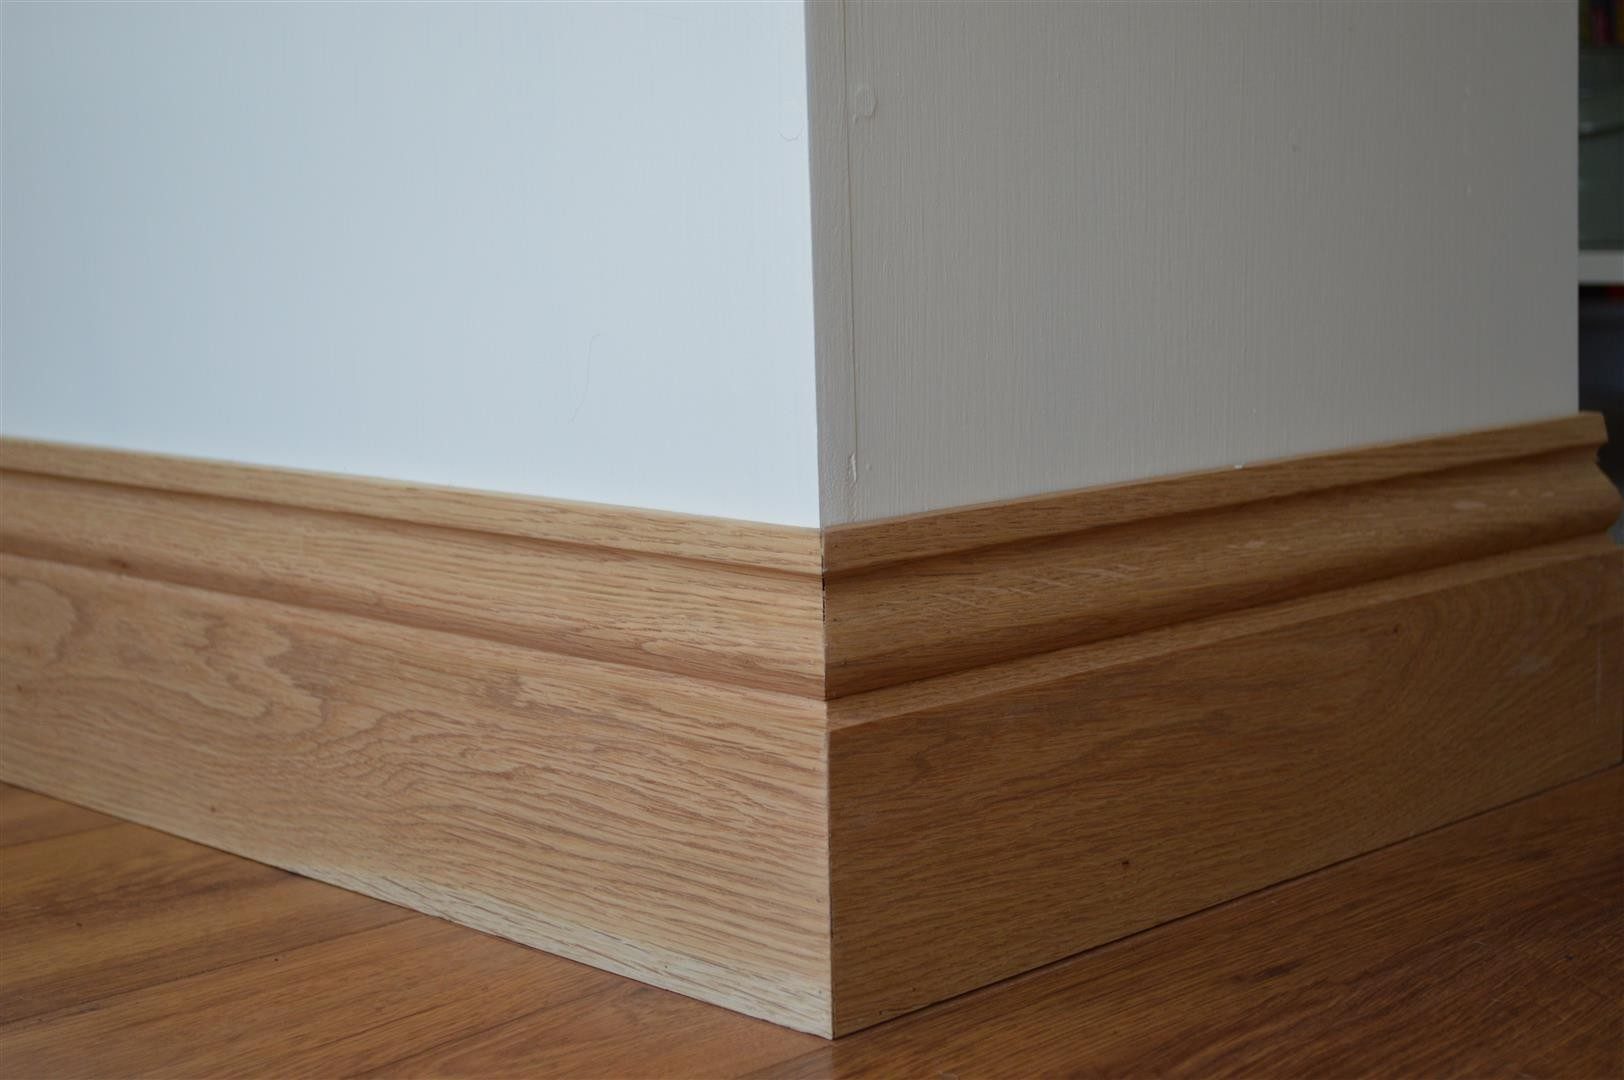 How Important Are Skirting Boards In Flooring?|